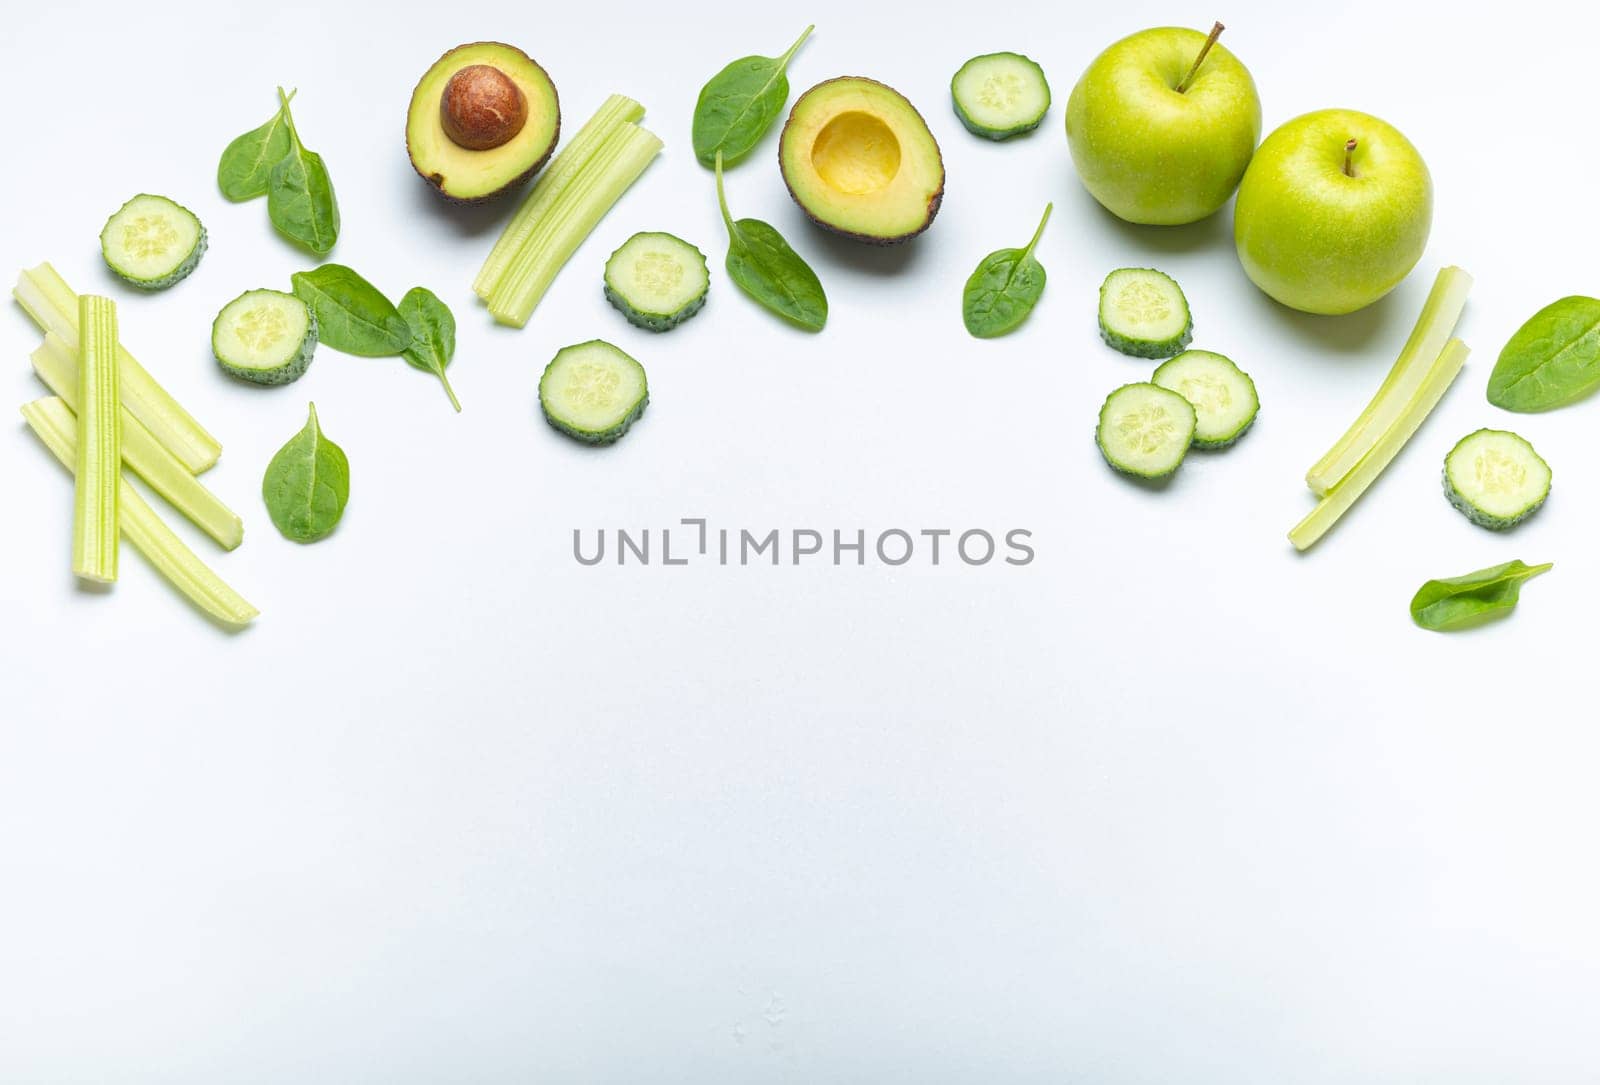 Healthy food border with green fresh vegetables and fruit on simple white background: apples, spinach, celery sticks, spinach leaves, avocado, cucumber. Space for text by its_al_dente